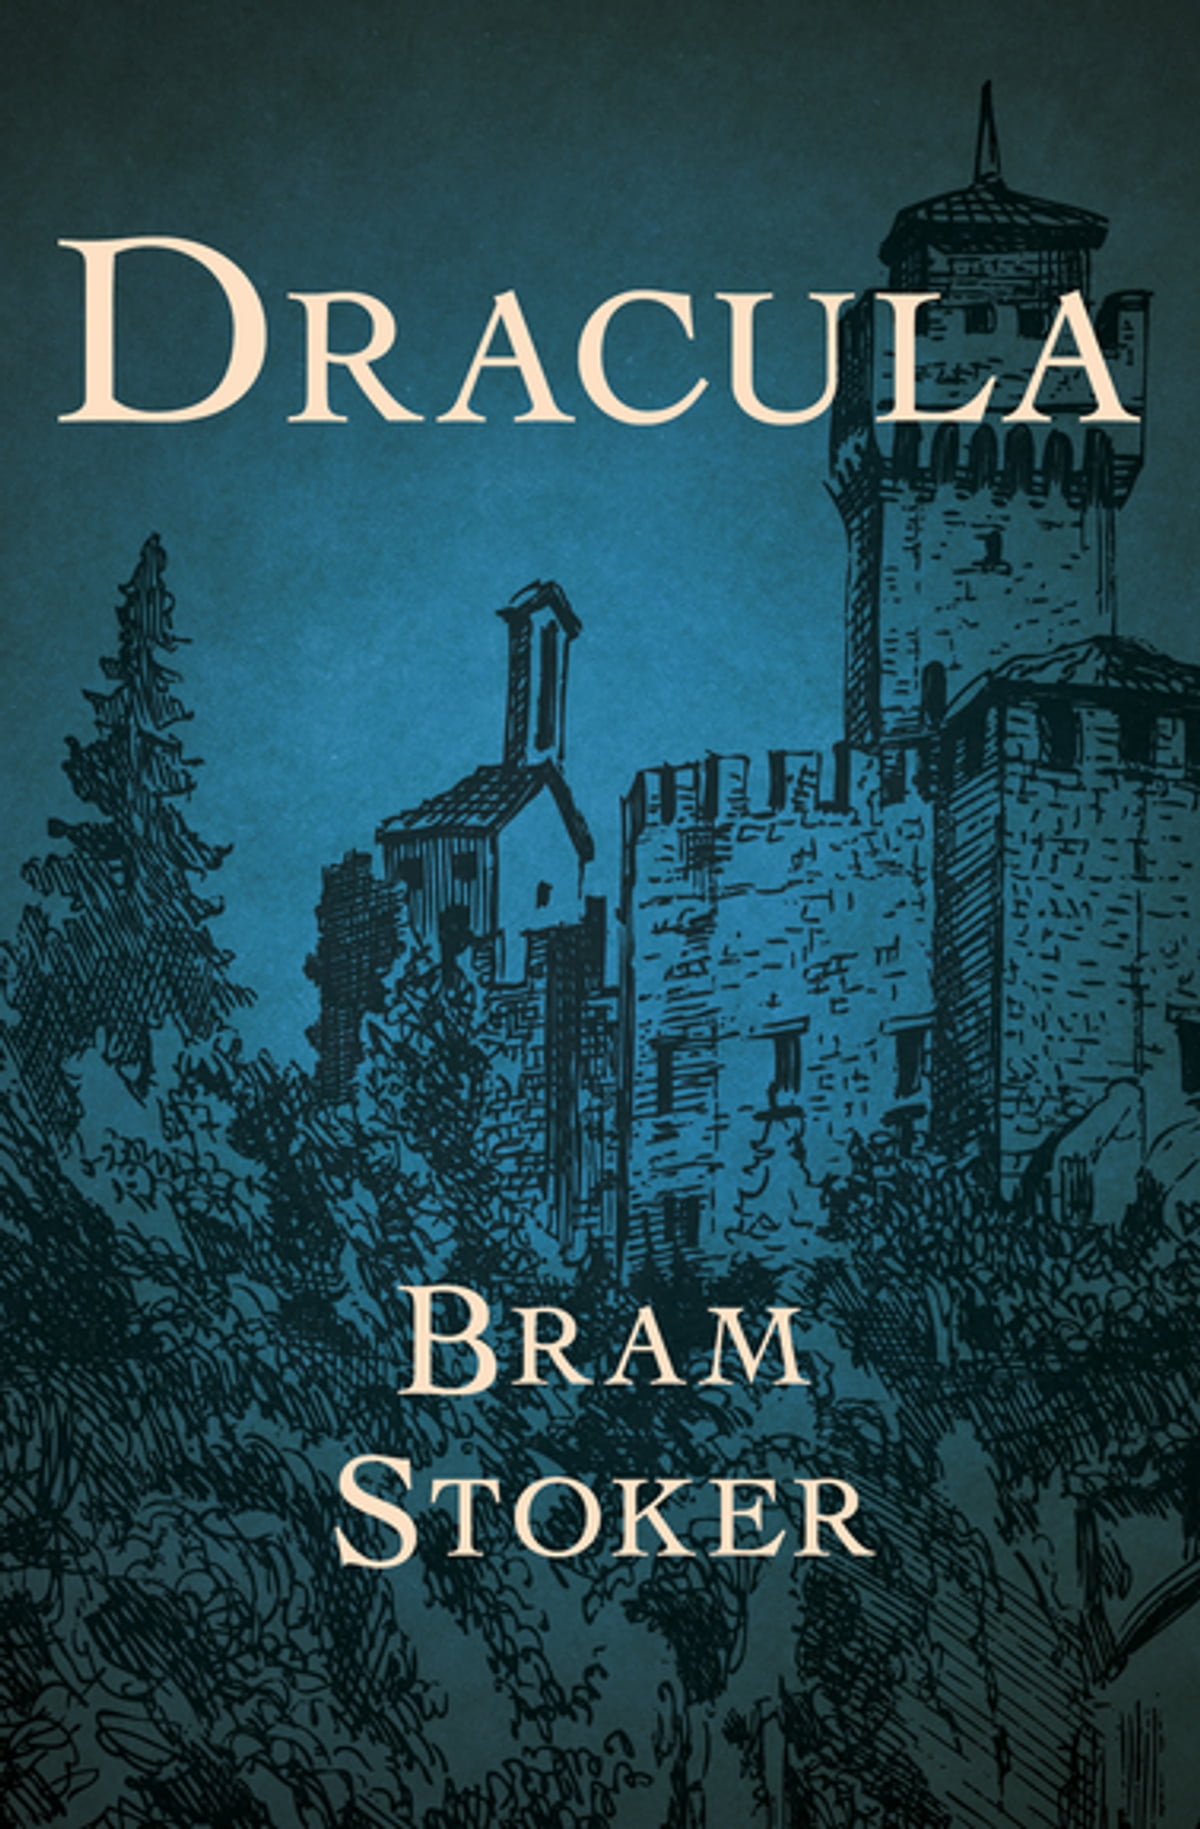 Fantasy Adventure Books: The audiobook of Dracula on Wehear